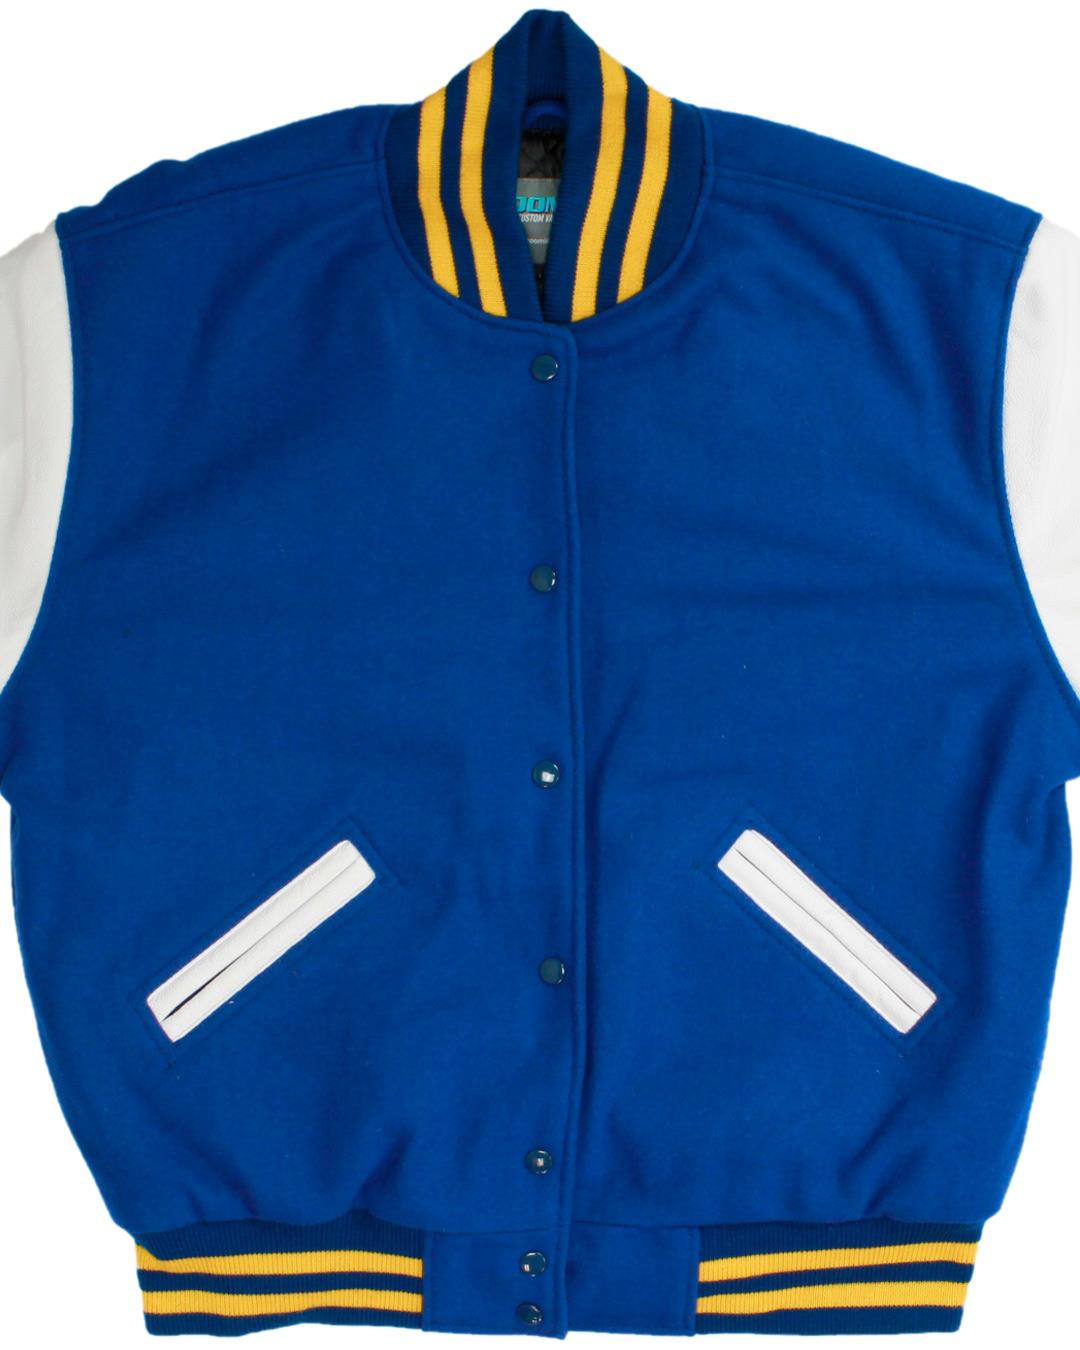 Stanfield High School Tigers Letter Jacket, Stanfield, OR - Front